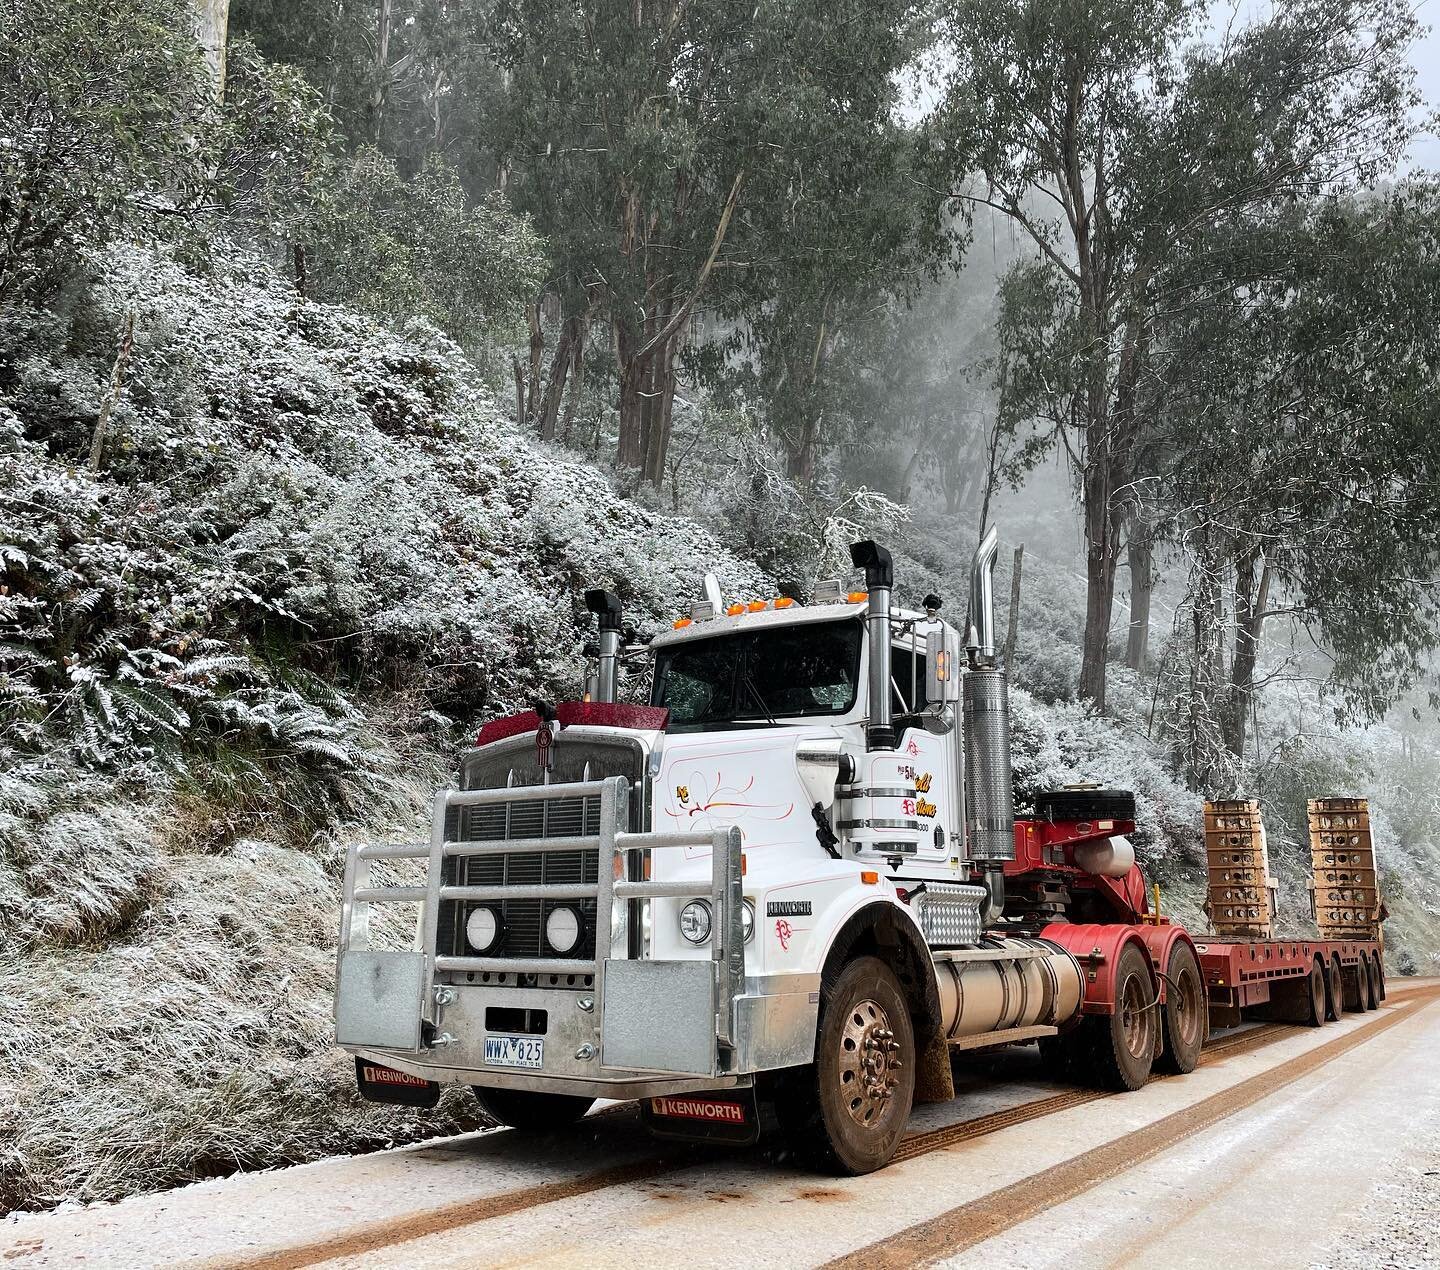 Rain, hail, SNOW or shine, the float doesn&rsquo;t stop and ensure the gear is on-site ready to go ❄️ This pic was well worth Jimmy braving the elements! #mansfieldconstructions